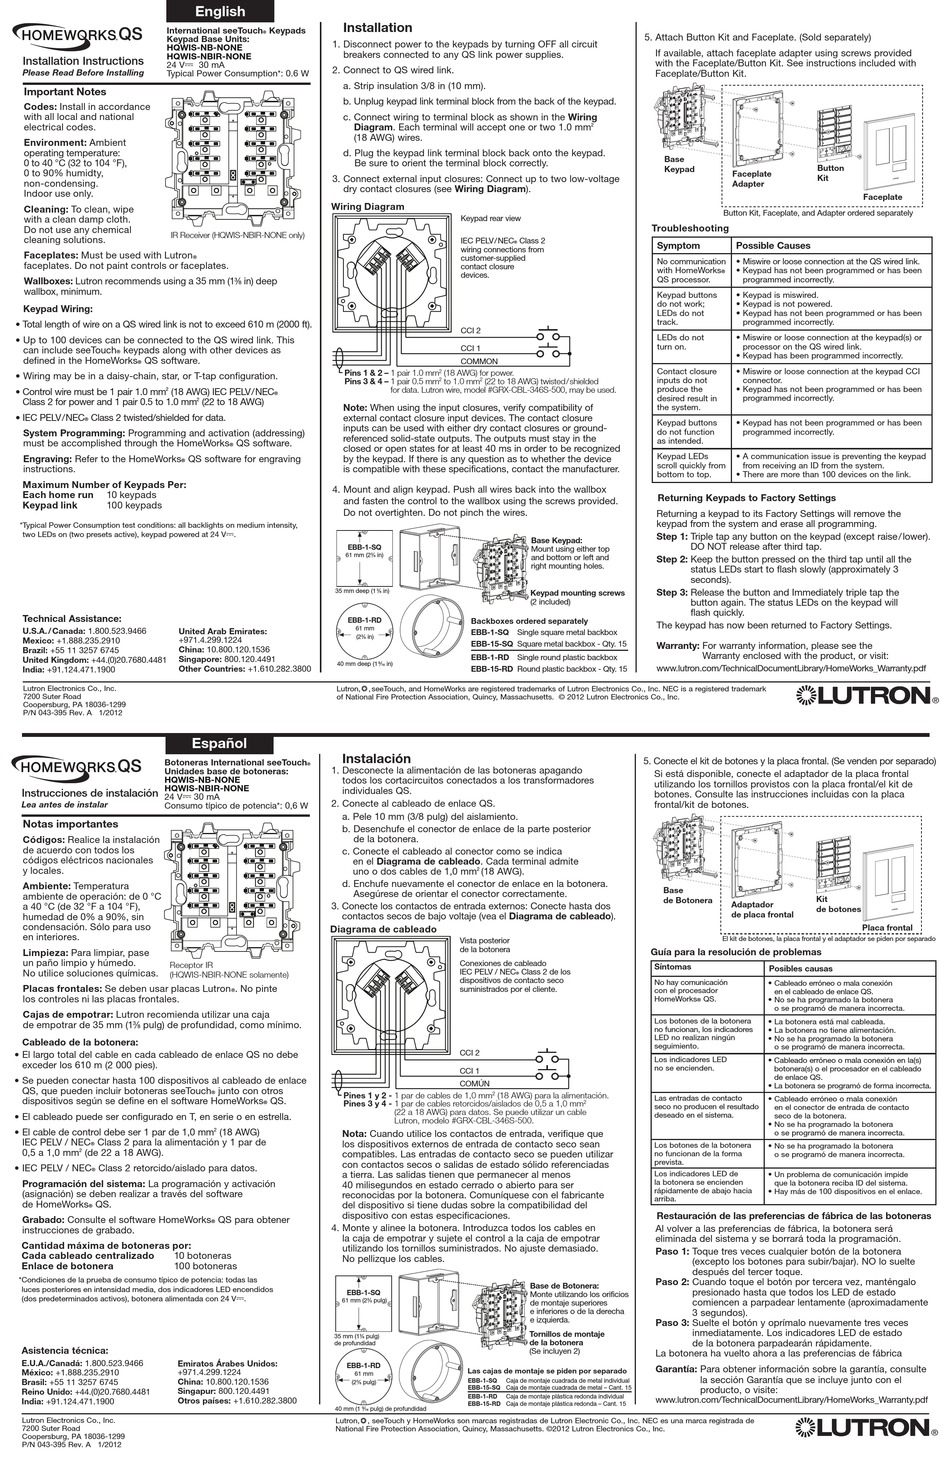 lutron homeworks qs technical reference guide